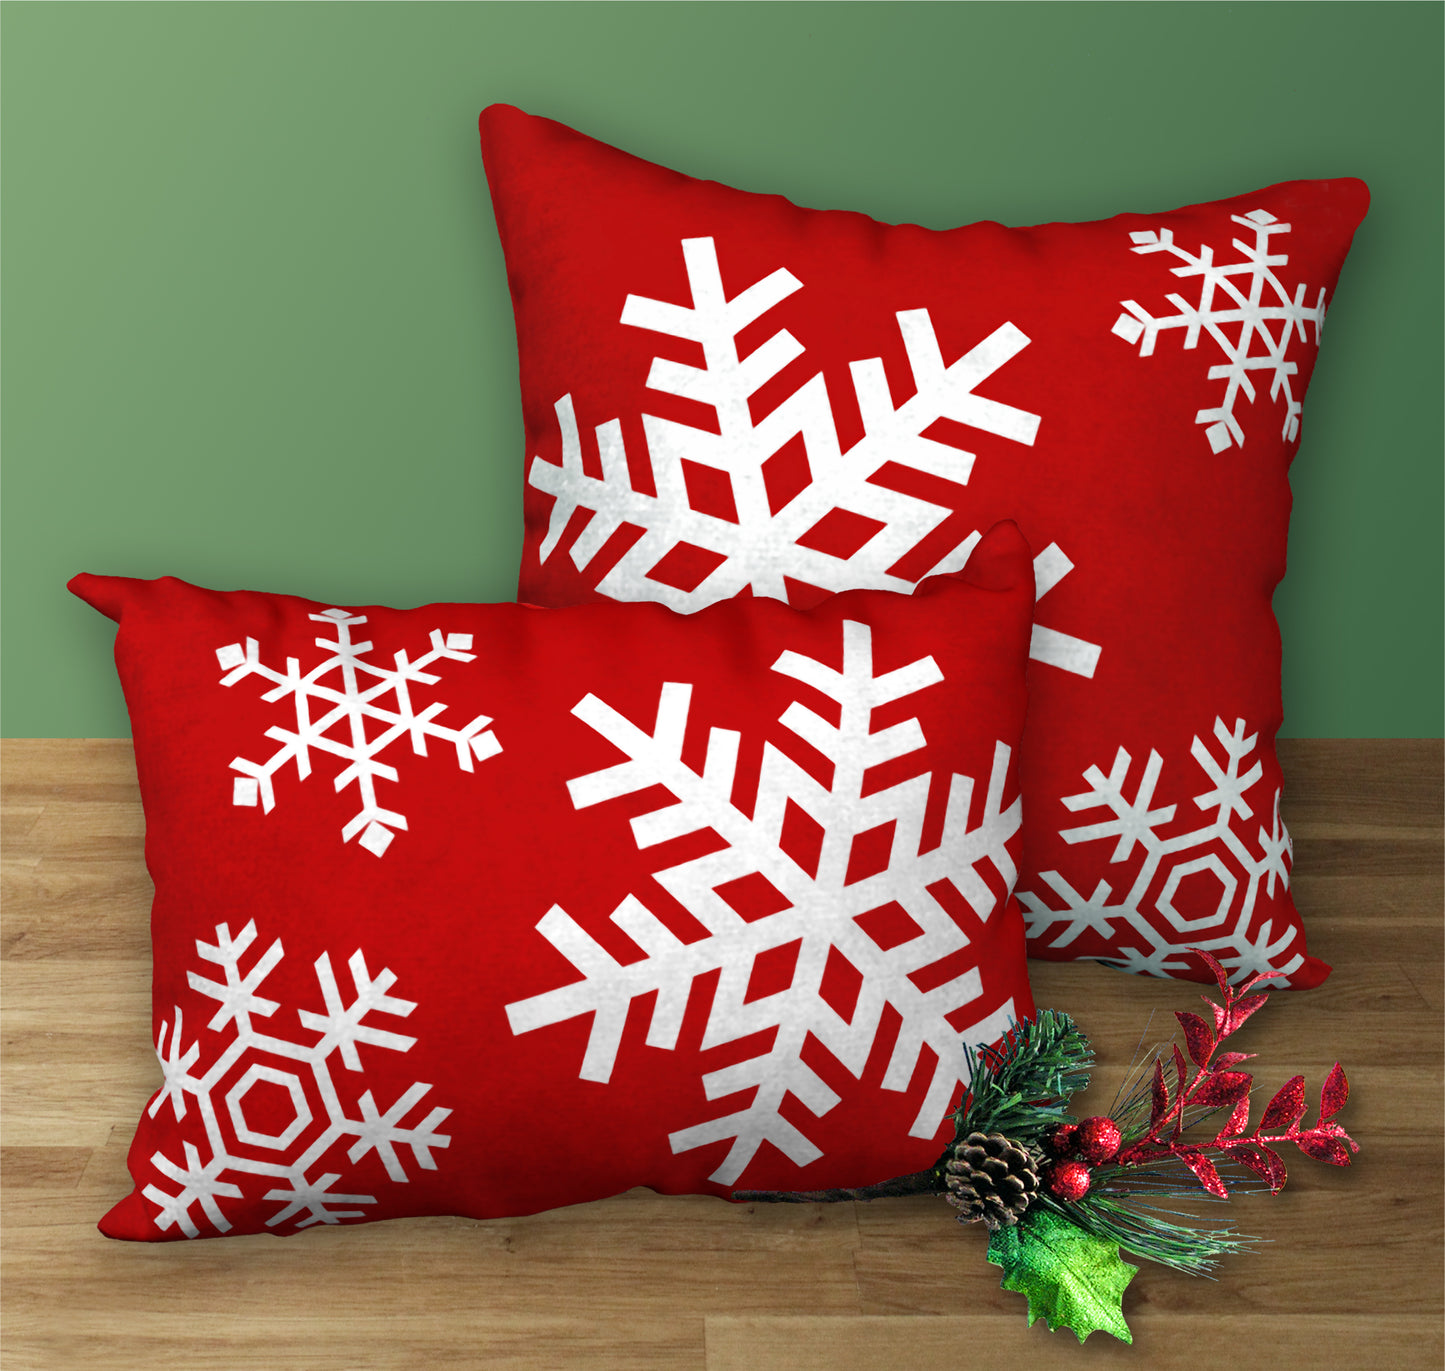 Set of 2 Red & White Snowflake Designer Christmas Pillows, 20"x14" and 18"x18"